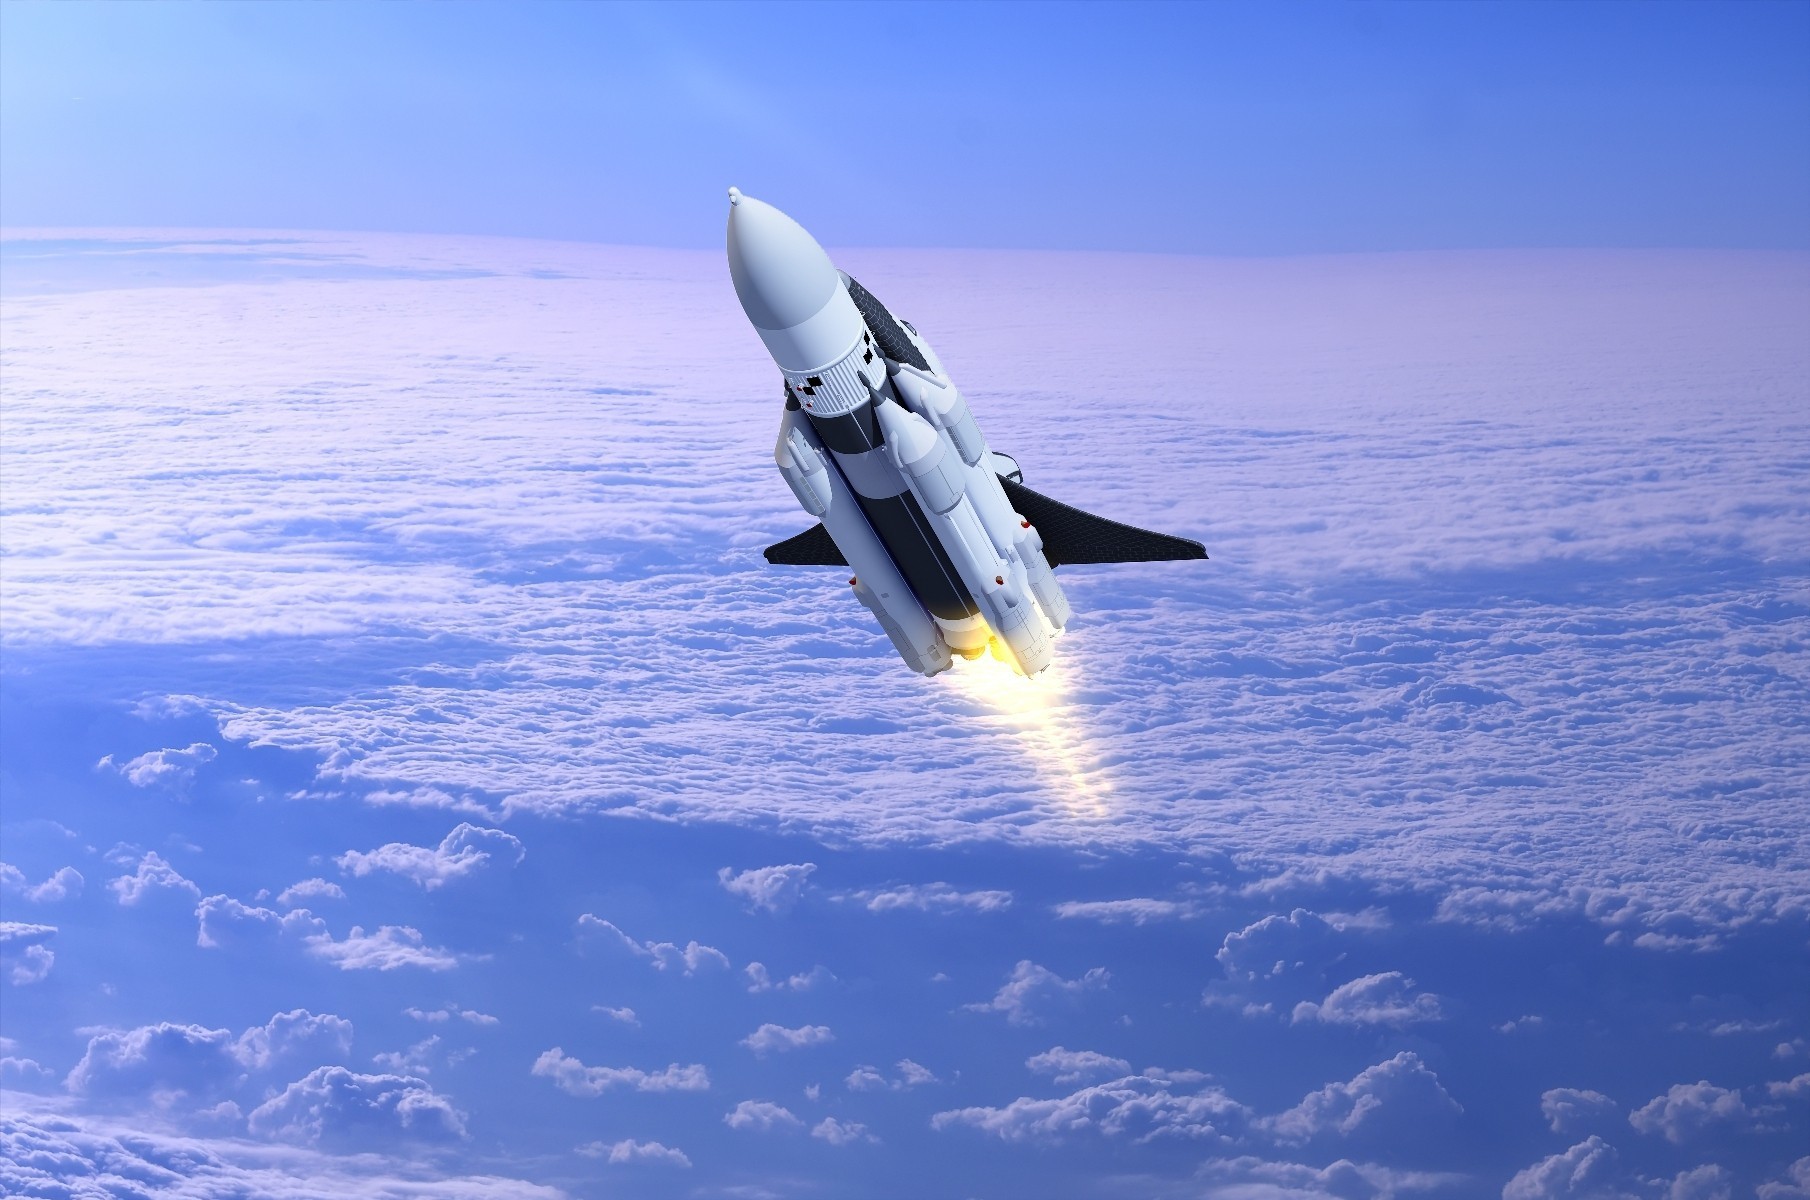 <p>Sooner than you think. According to <a href="https://www.forbes.com/sites/geoffwhitmore/2021/07/14/space-travel-updates-when-will-we-be-able-to-travel-to-space/?sh=12e9f52e6dff"><em>Forbes</em></a>, Virgin Galactic’s successful trip means the company could start sending civilians up into space as soon as early 2022. Likewise, Blue Origin, which has a Federal Aviation Administration licence for human space travel through August 2021, could officially enter the space tourism game by early 2022.</p>